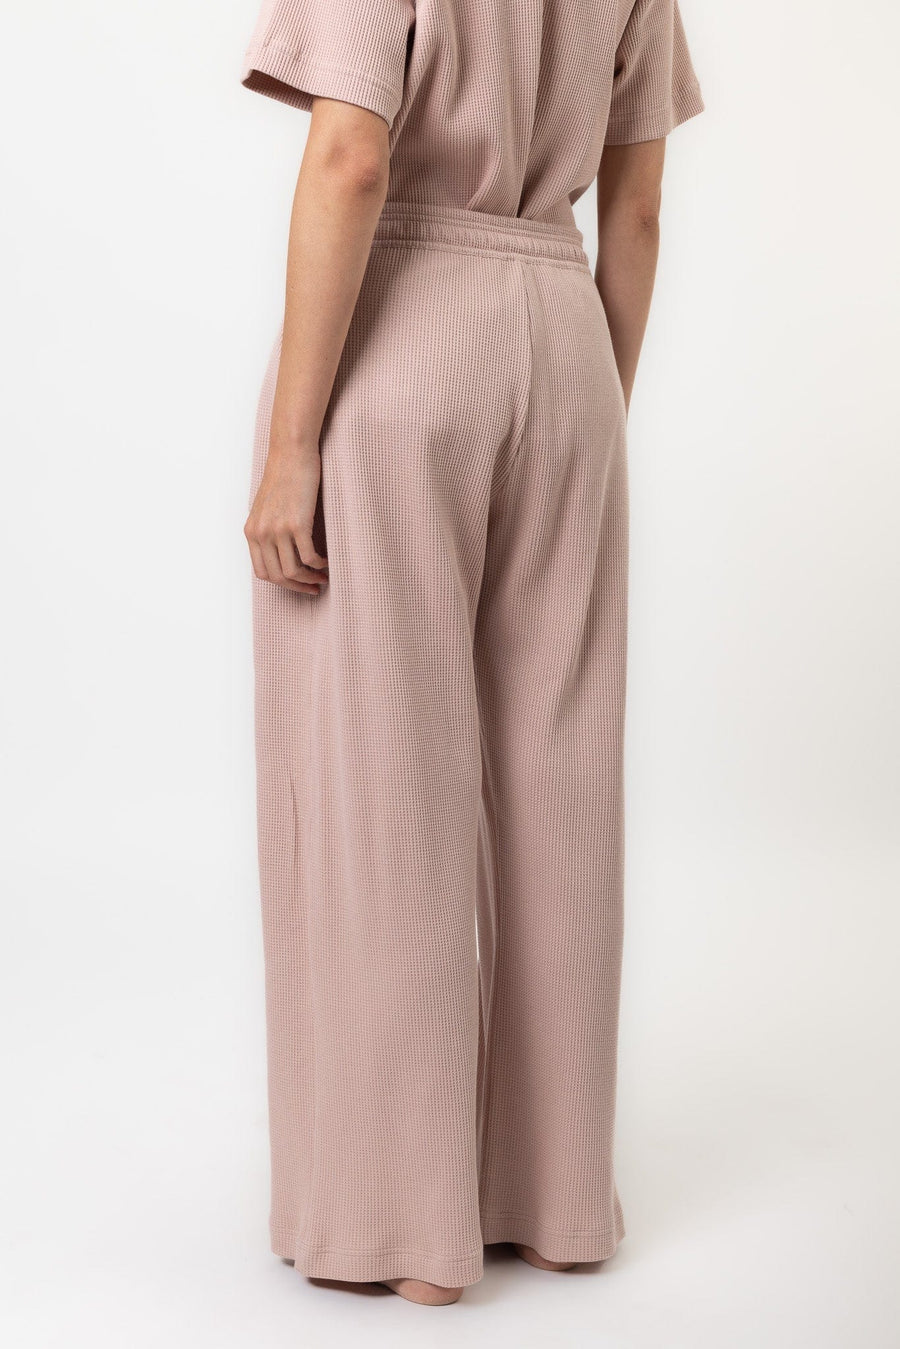 Melodic Pant | Dusty Pink Melodic Pant Lounge Pants Pajamas Australia Online | Reverie the Label  BOTTOMS Melodic Pant